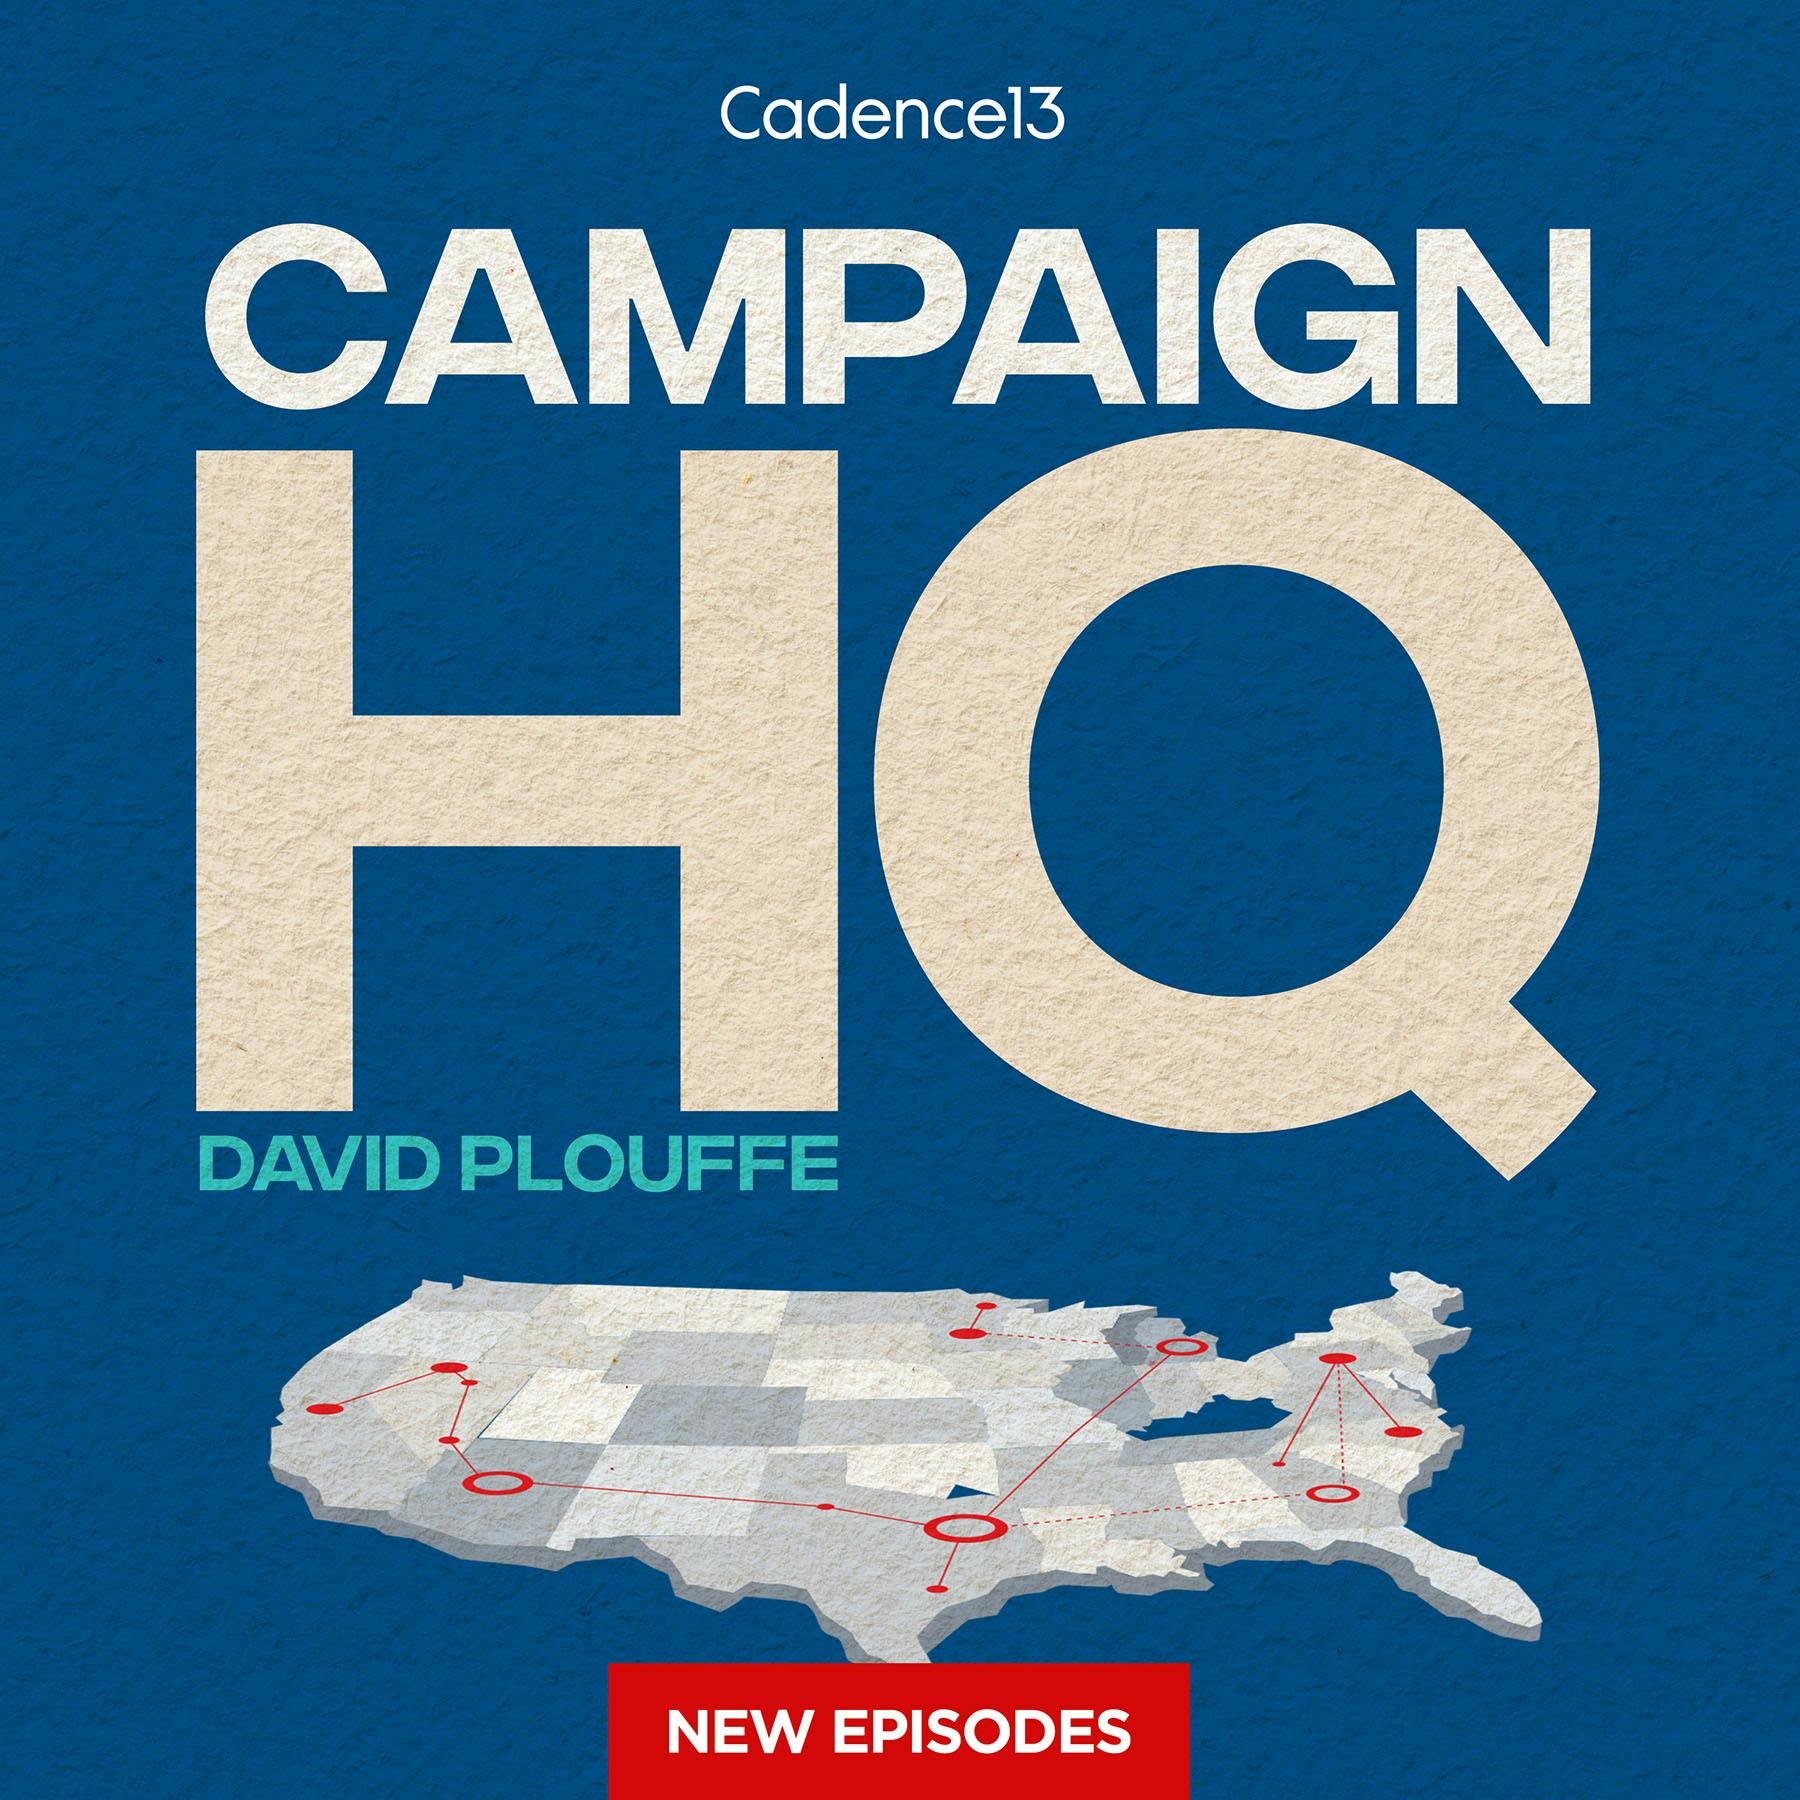 Campaign HQ with David Plouffe:Cadence13